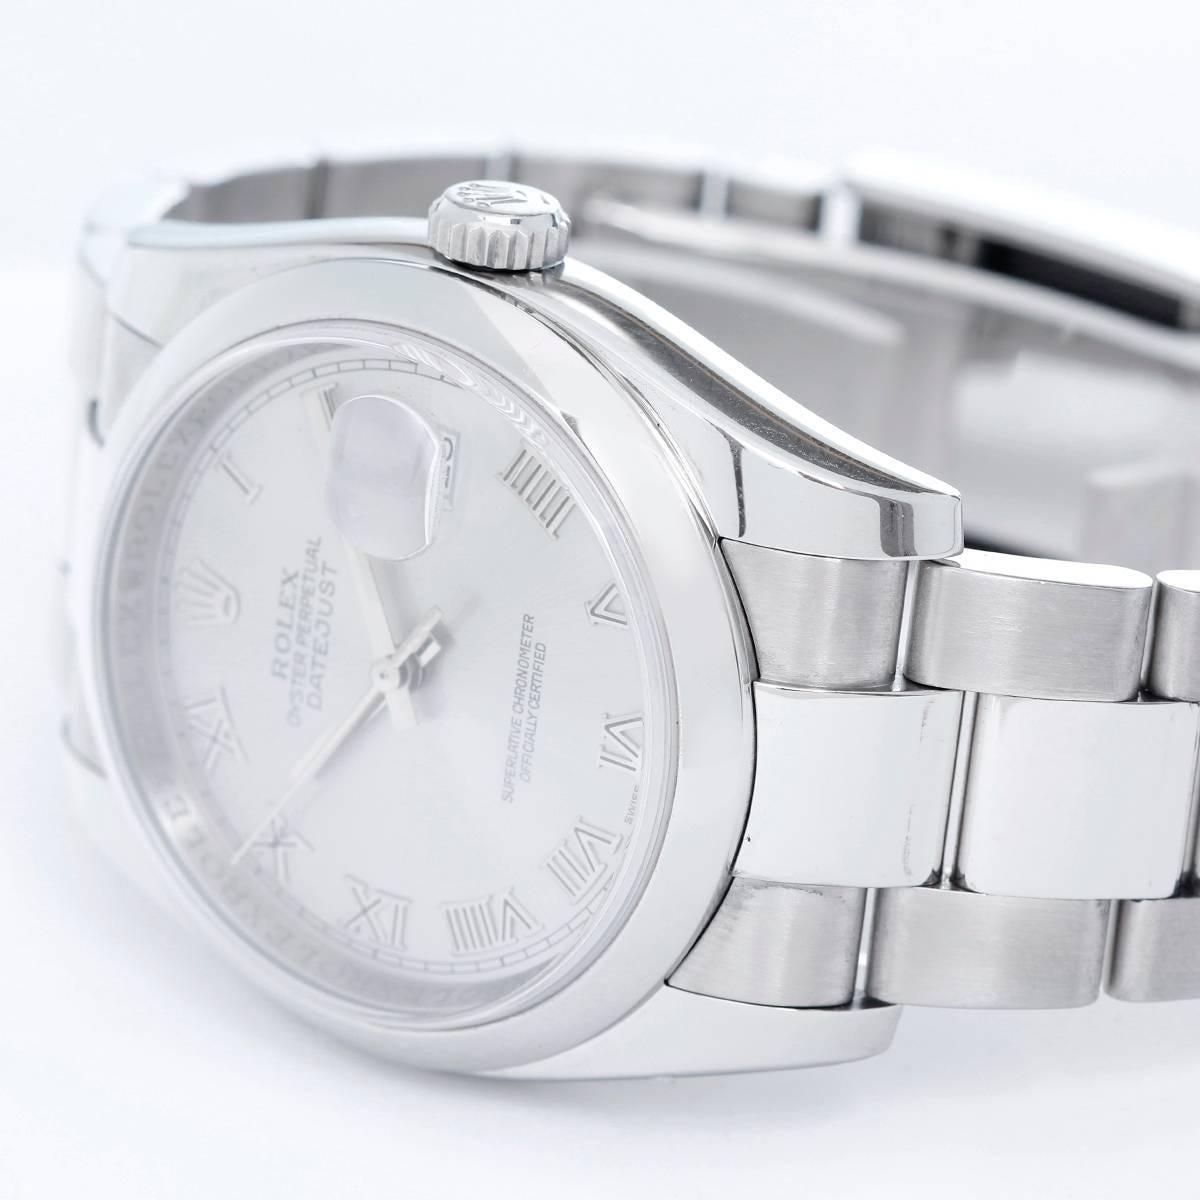 Rolex Datejust Men's Stainless Steel Automatic Winding Watch 116200 -  Automatic winding, 31 jewels, Quickset, sapphire crystal. Stainless steel case with smooth bezel (36mm diameter). Silver dial with Roman numerals. Stainless steel Oyster